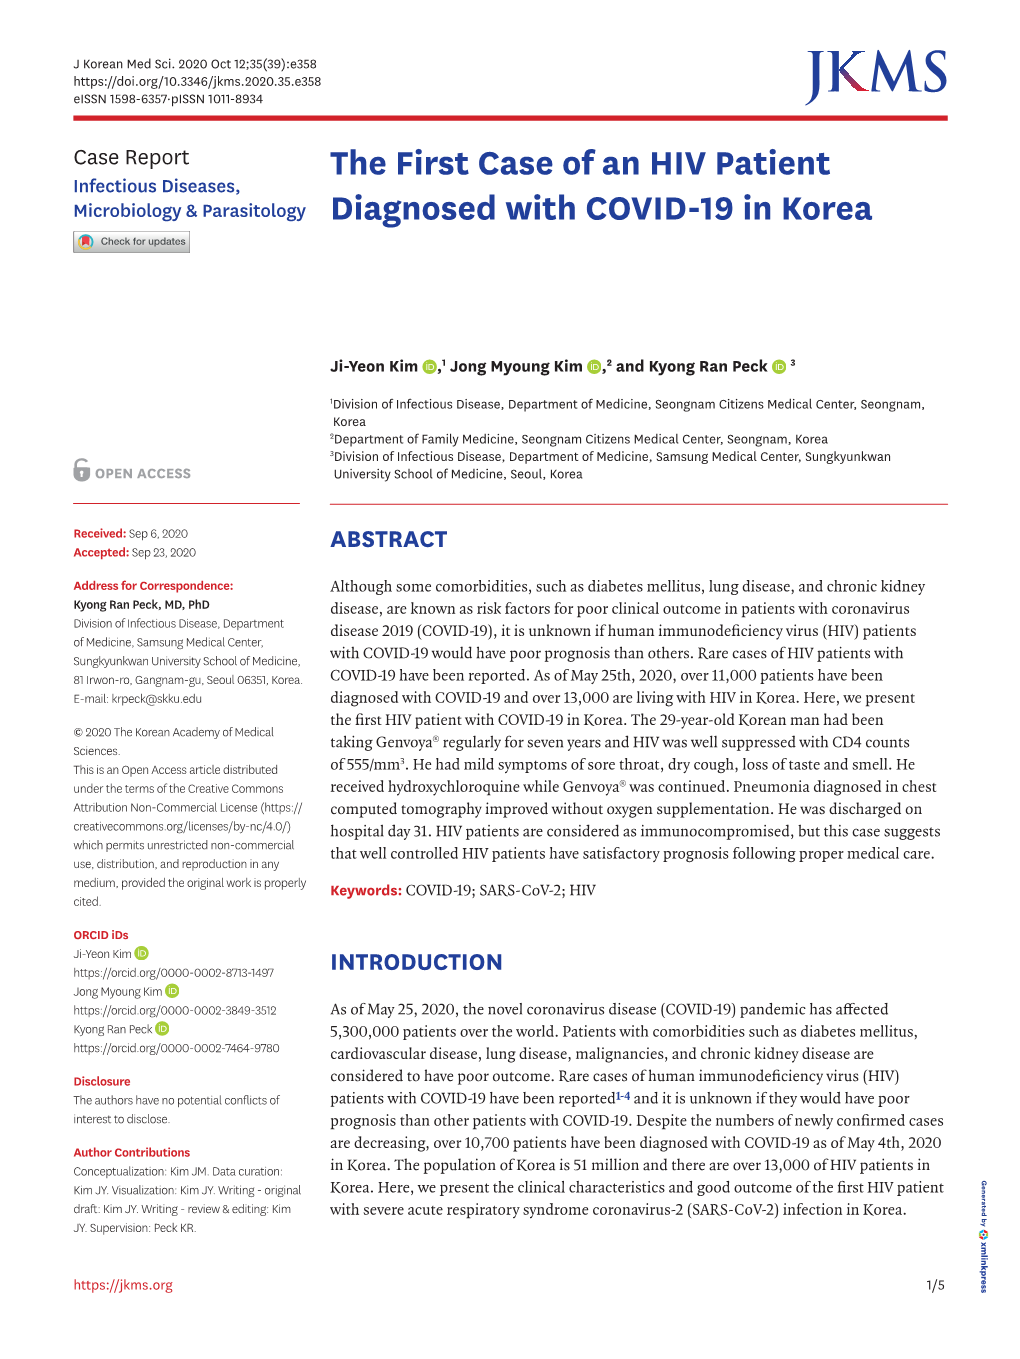 The First Case of an HIV Patient Diagnosed with COVID-19 in Korea